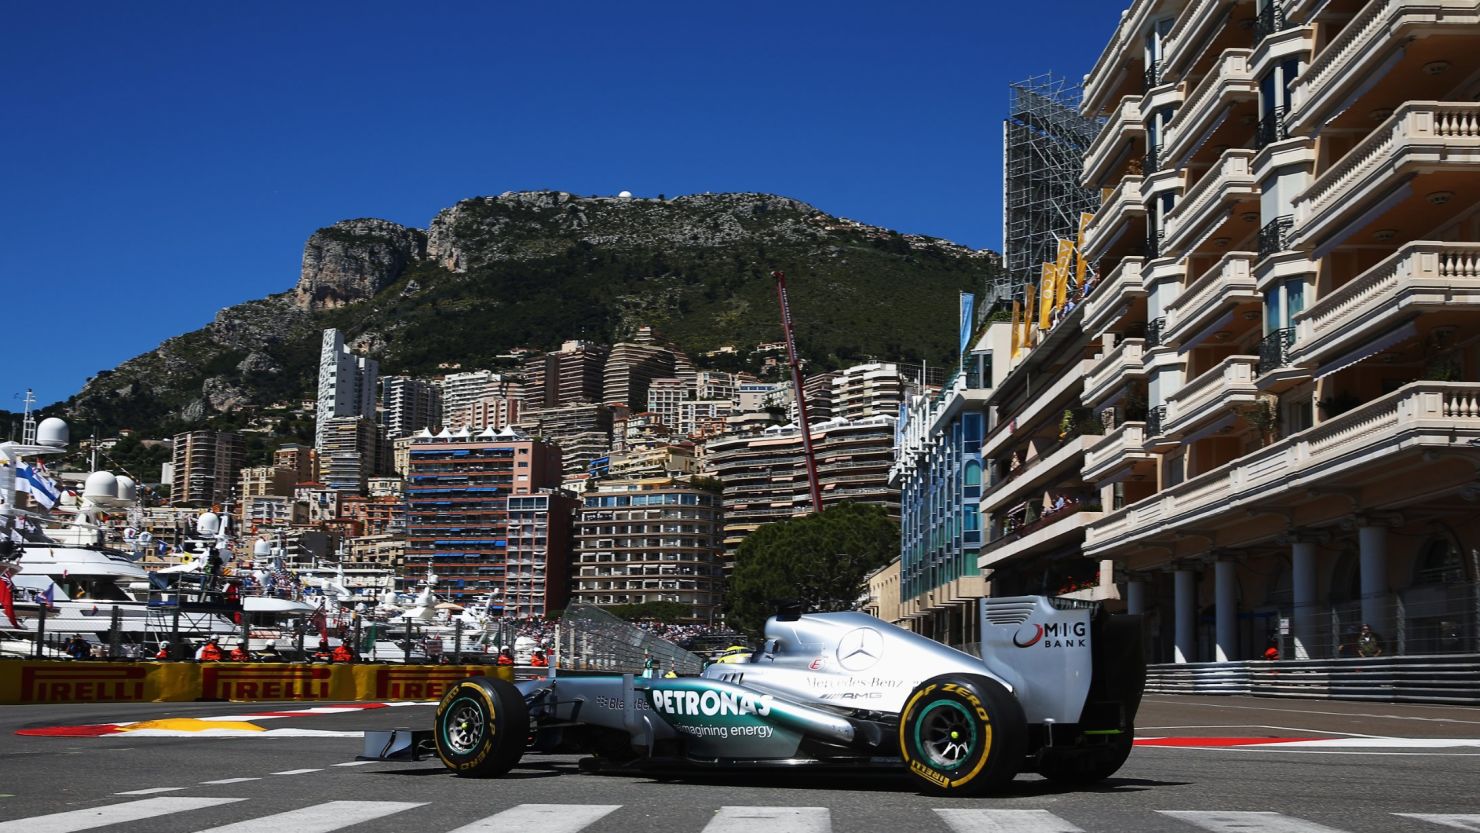 Nico Rosberg was fastest in Monaco but Mercedes still have concerns over their race pace.